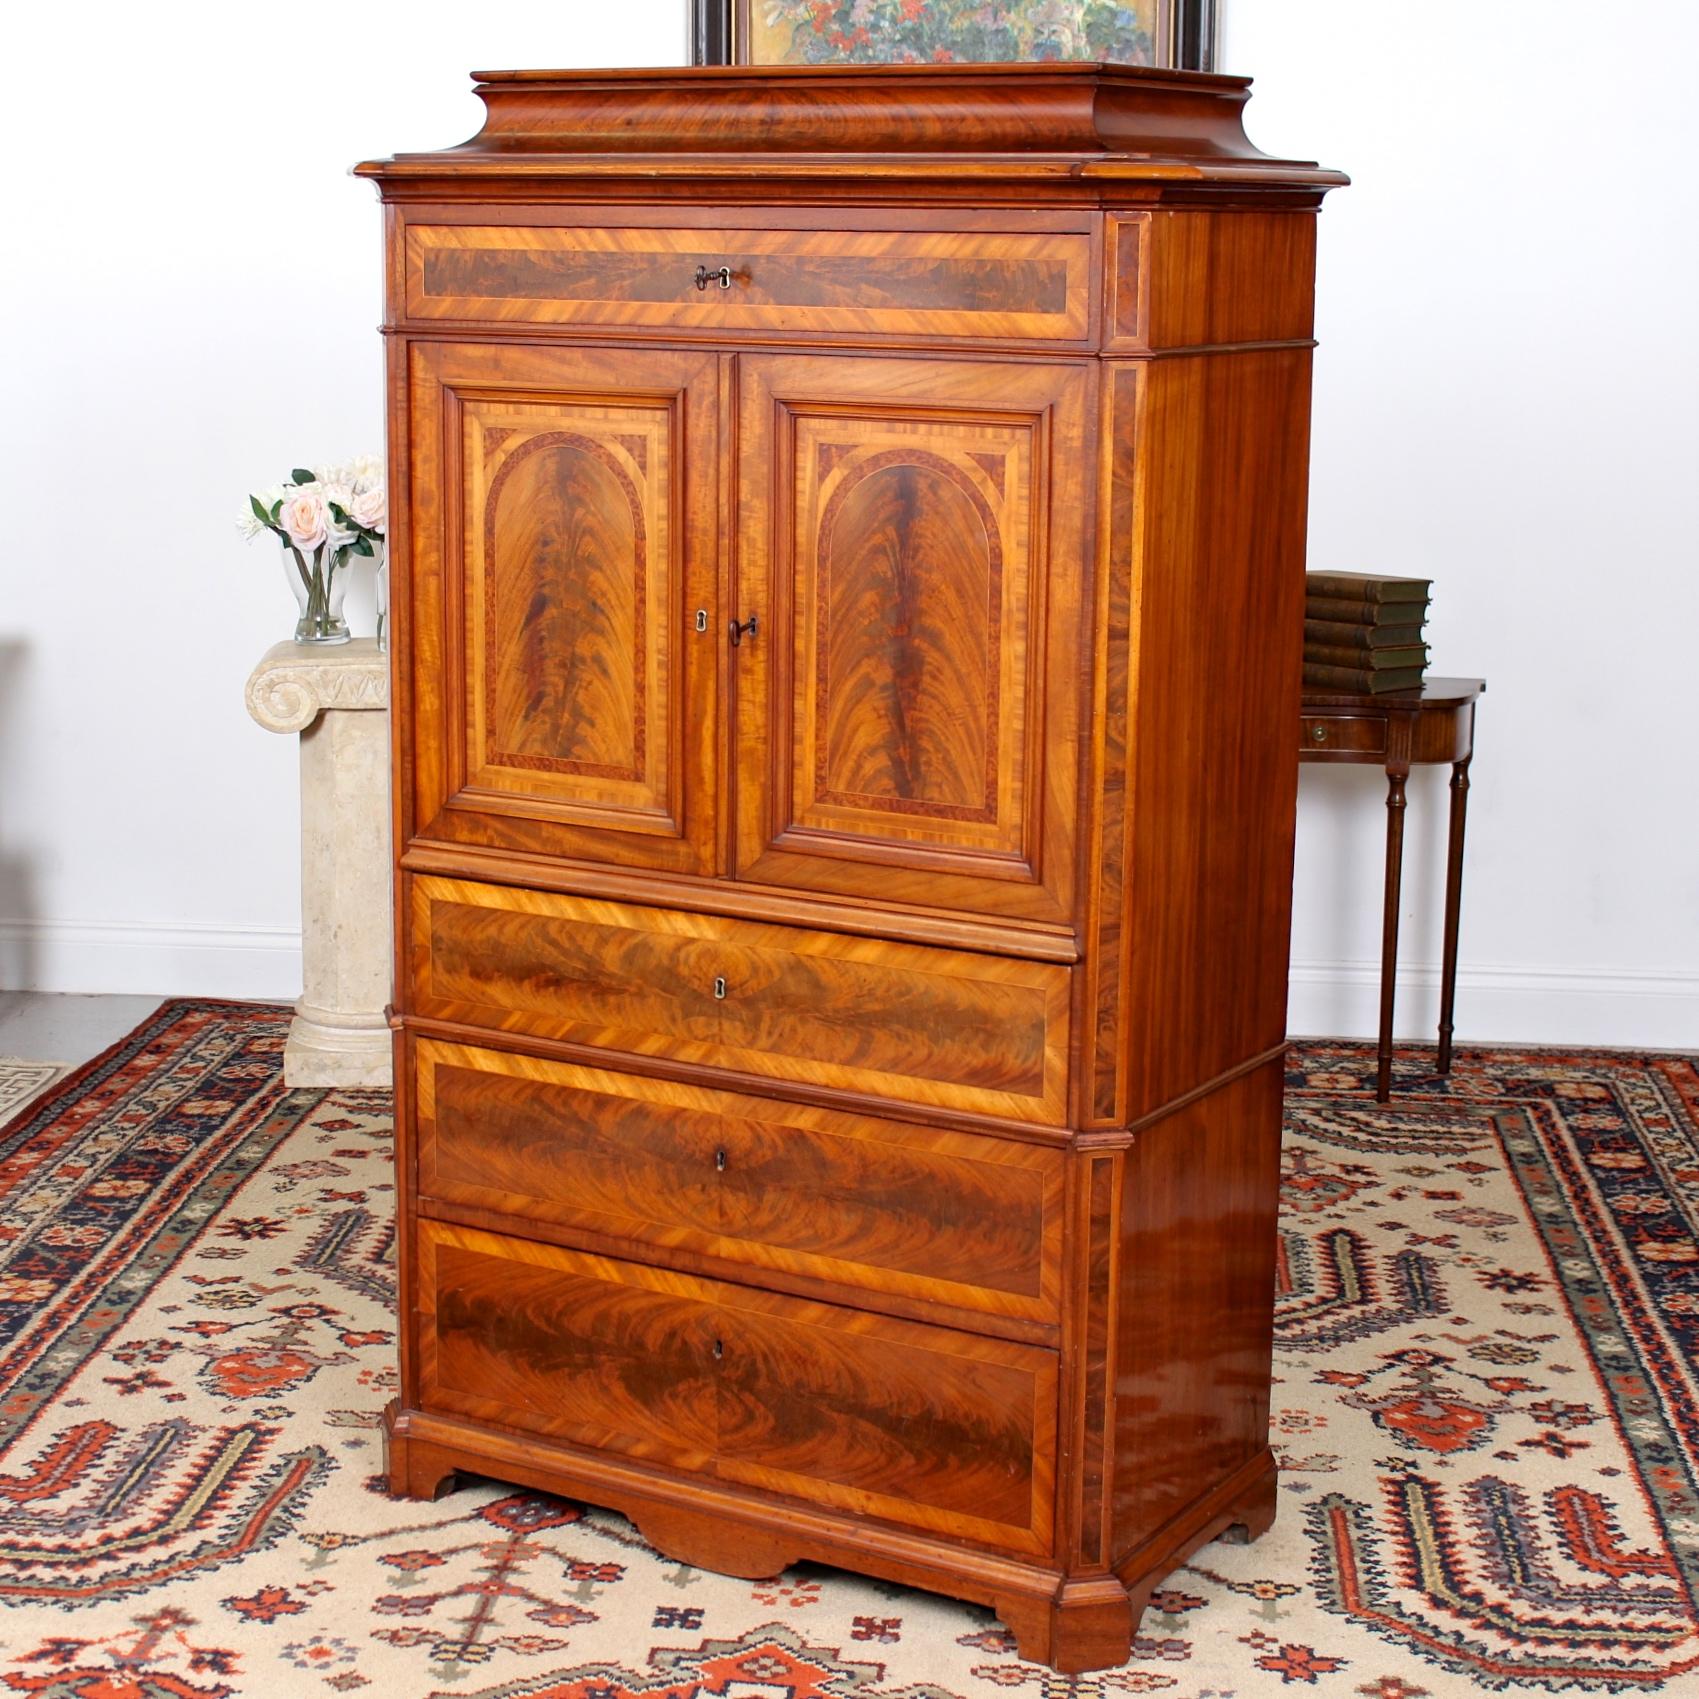 An impressive 19th century Danish Biedermeier secretaire chest.

Boasting fine quality flamed mahogany marquetry work throughout.

The distinctive Biedermeier pagoda top a pair of cupboard doors enclosed a fitted interior briefly comprising